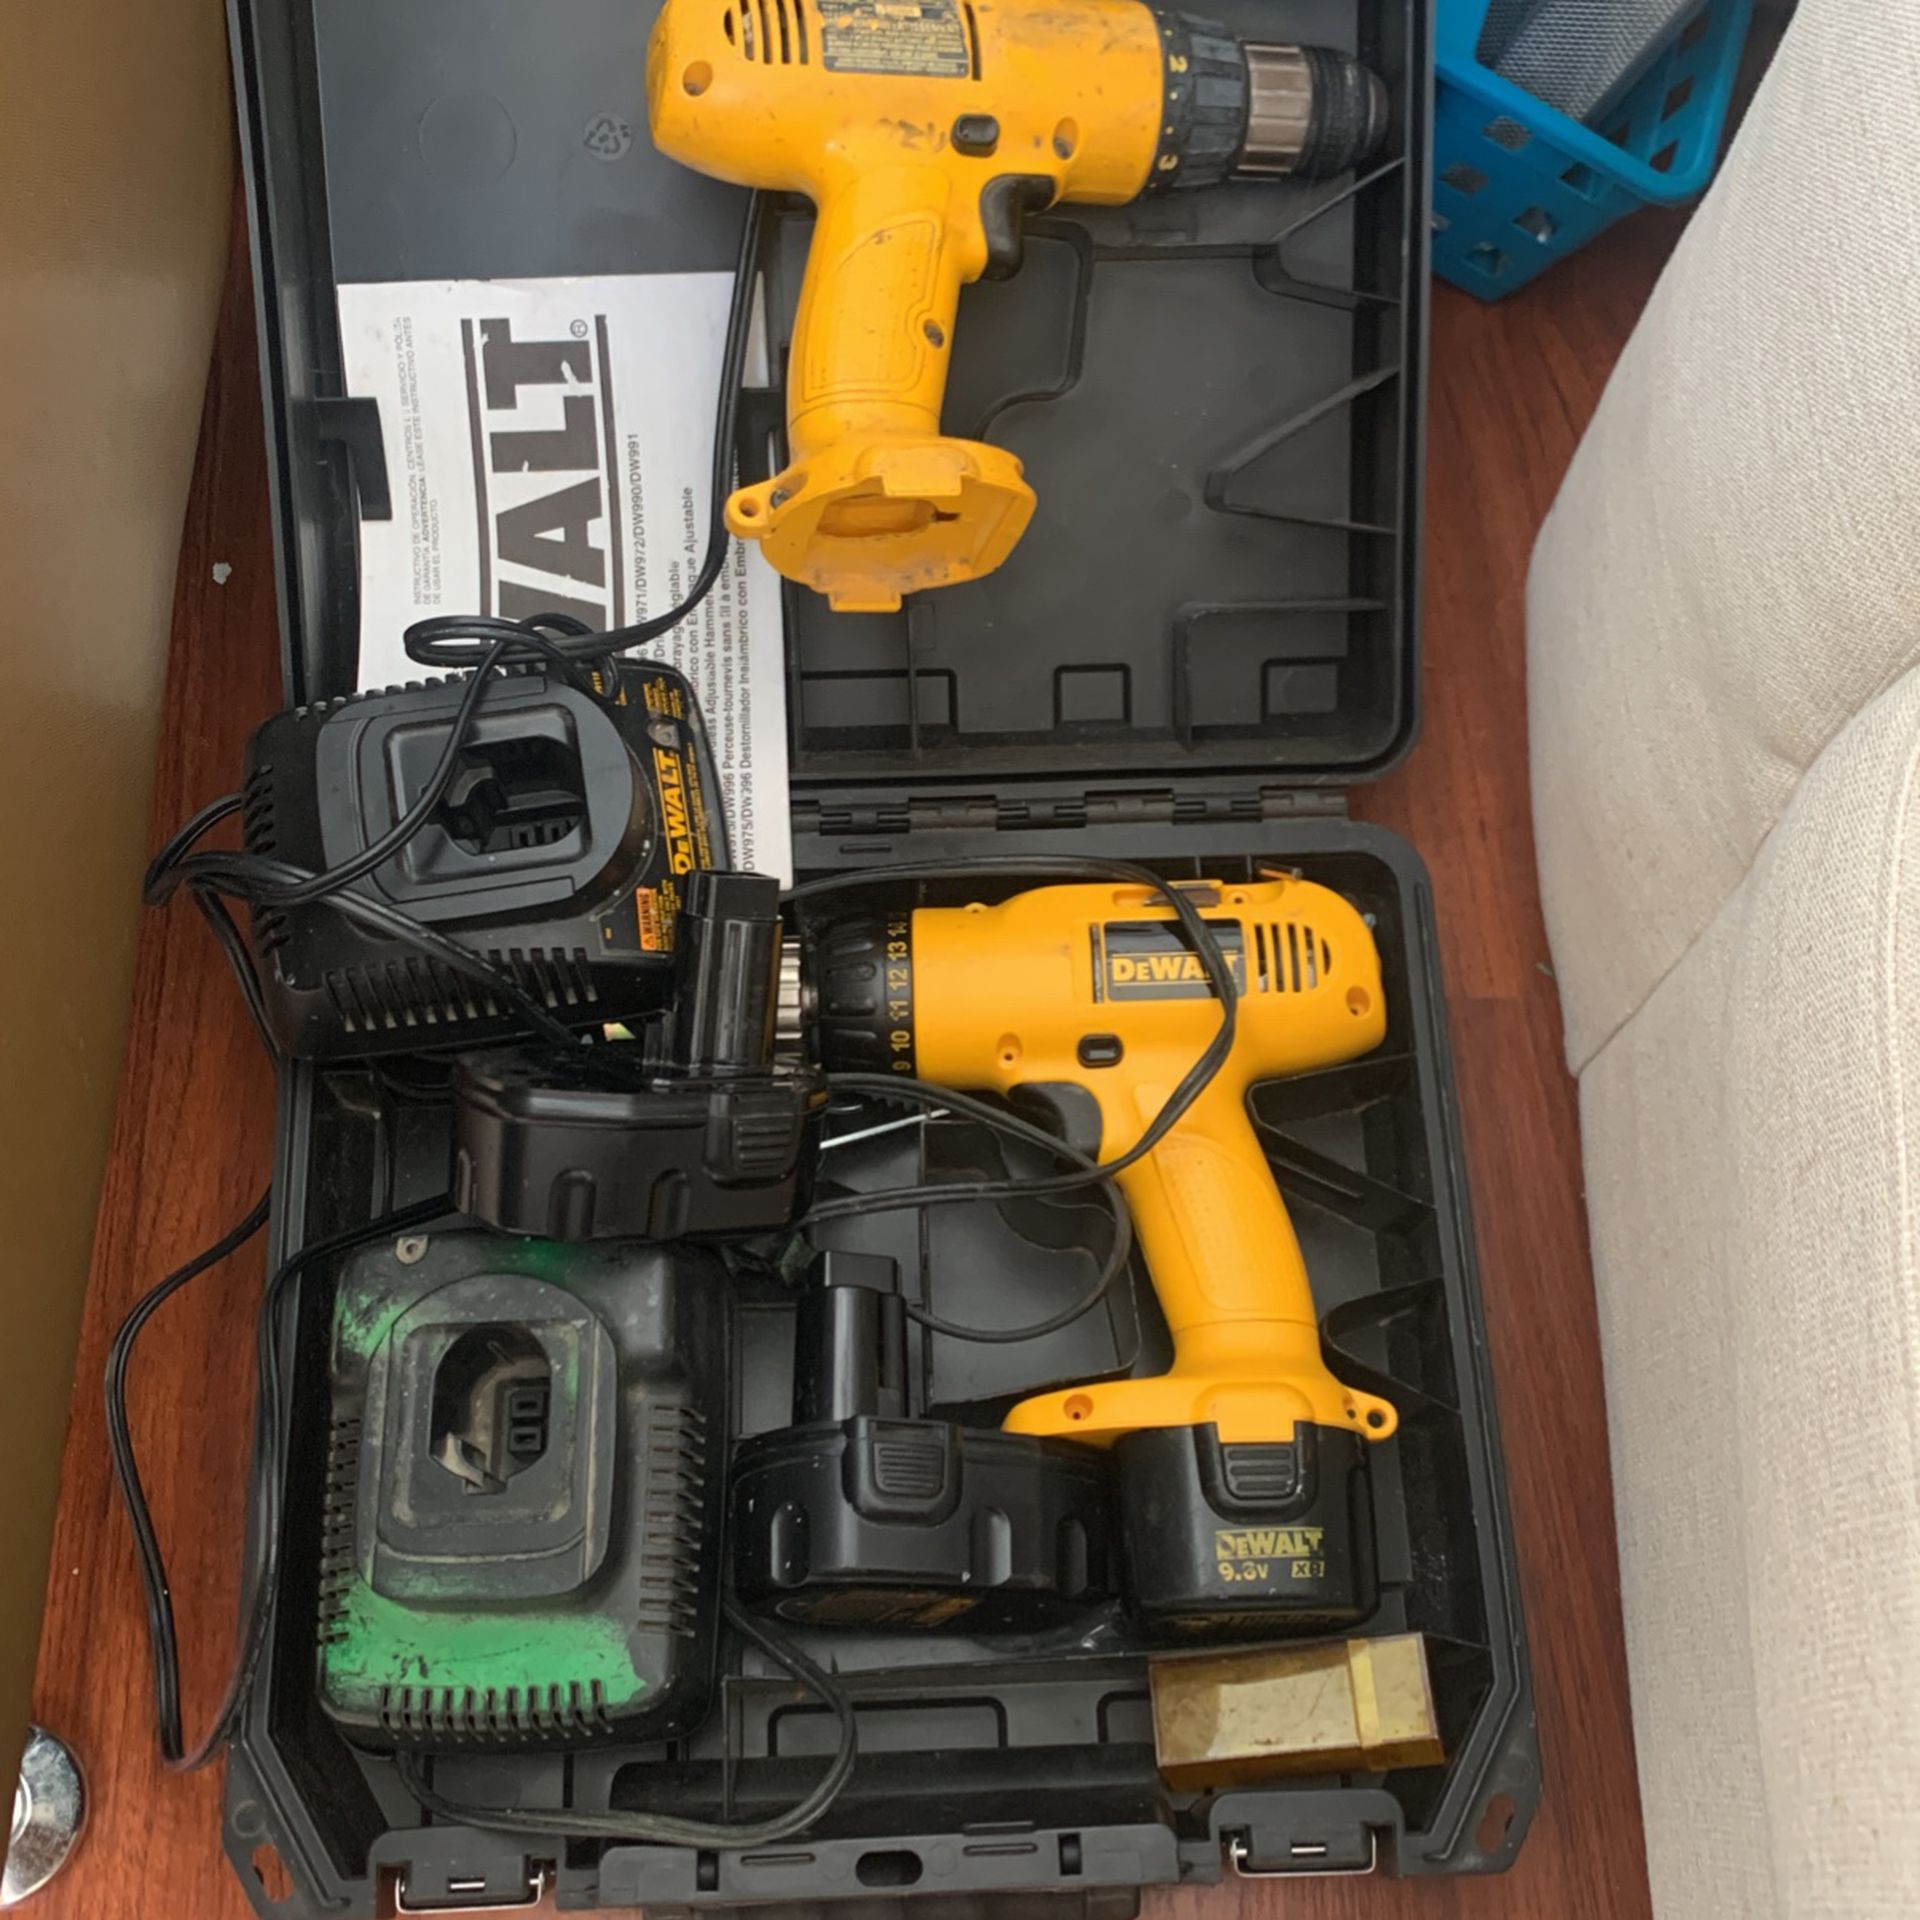 Two Dewalt Drills And Batteries (box not included)